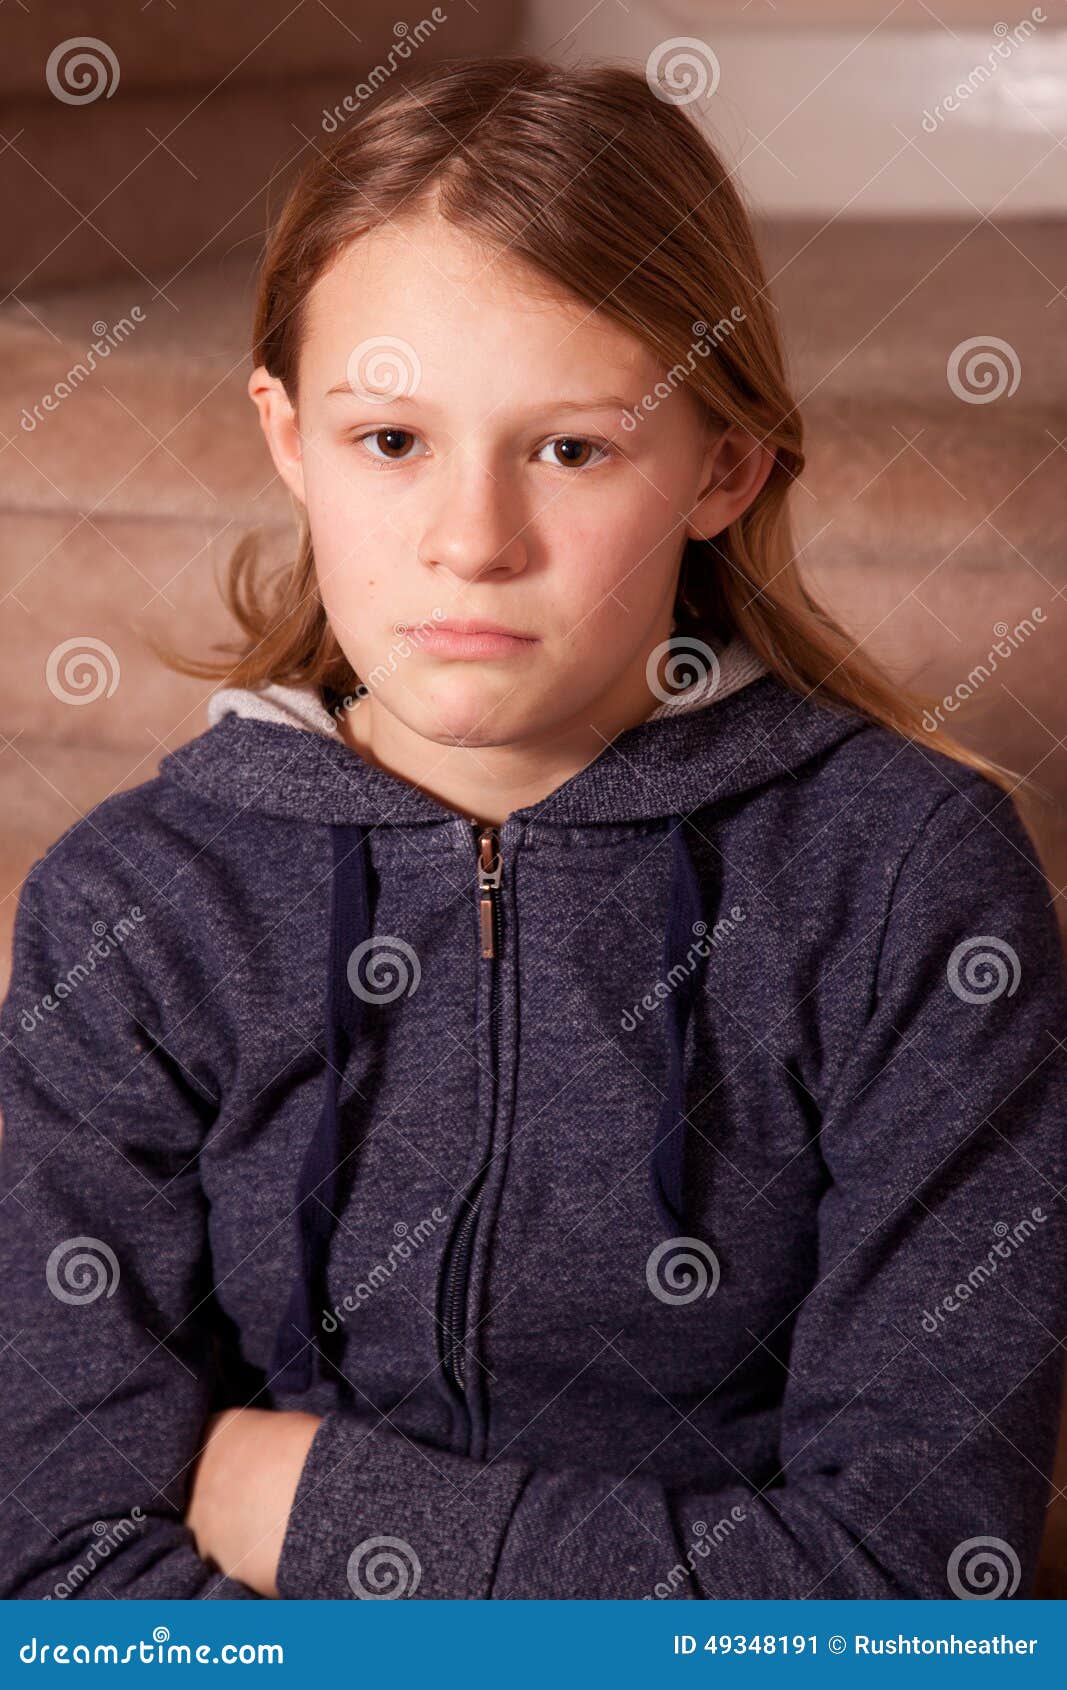 Sulky girl stock image. Image of portrait, unhappy, grouchy - 49348191